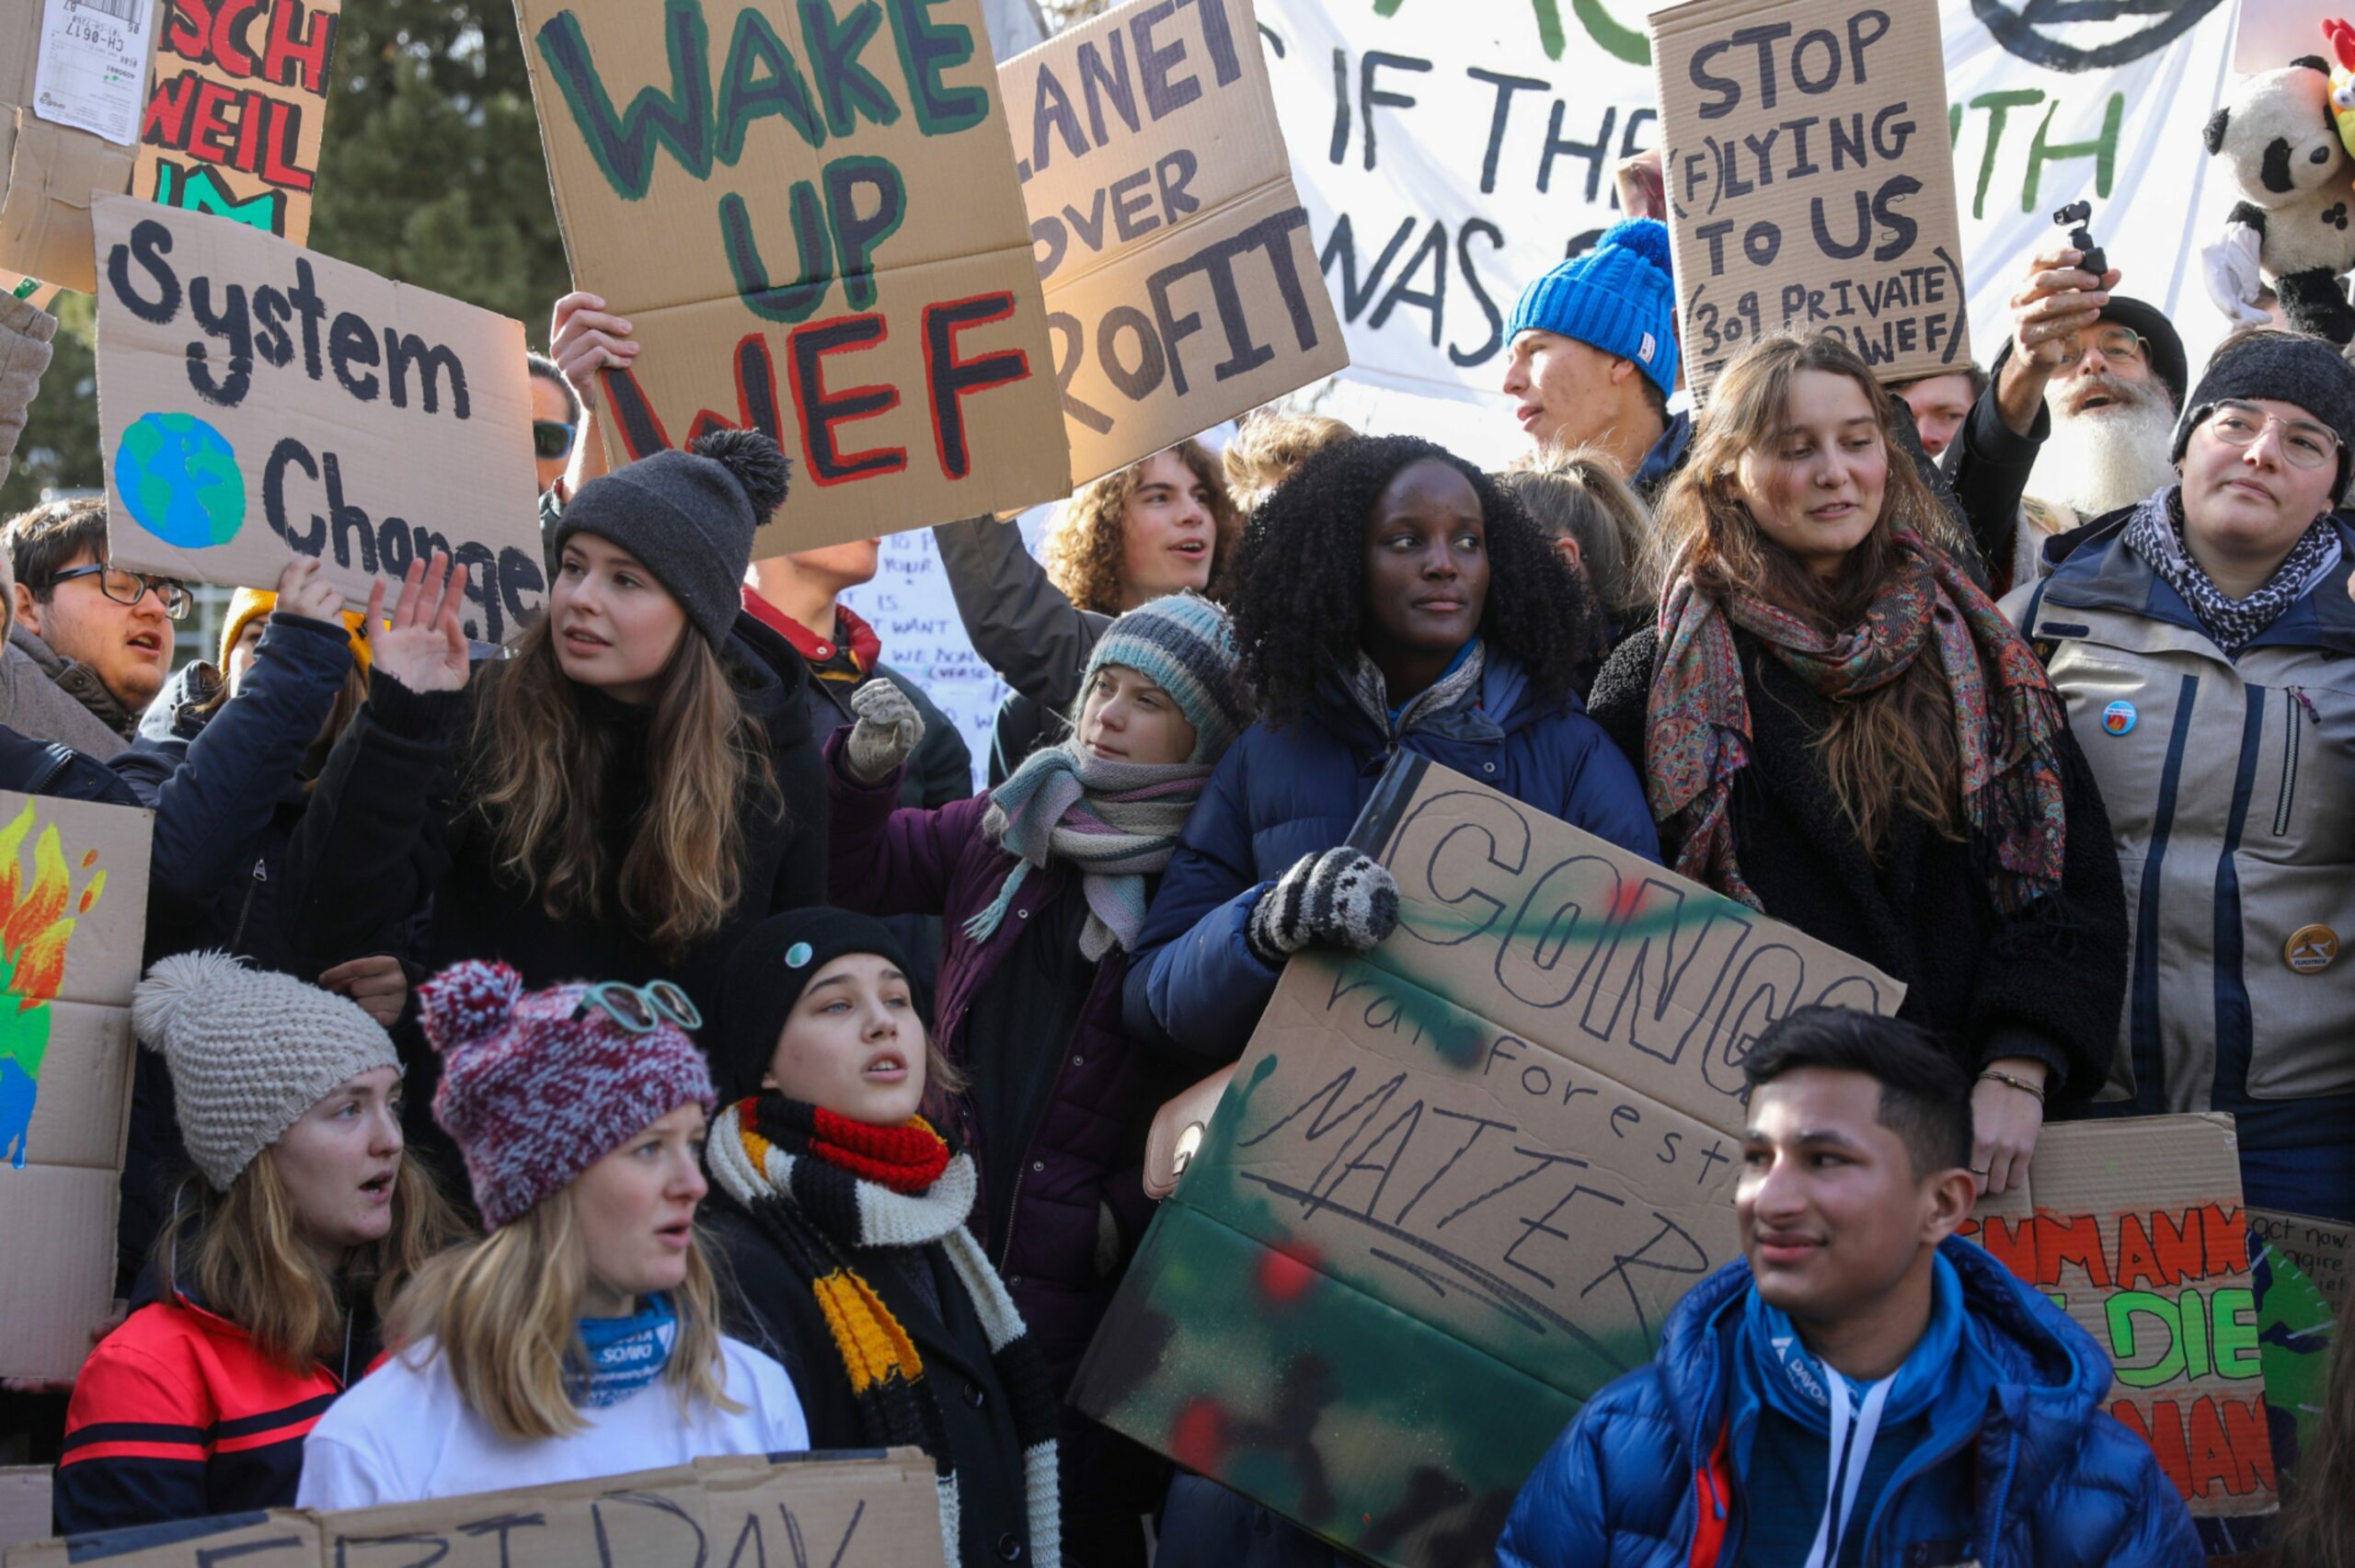 Vanessa Nakate, centre, pictured with other young activists, including Greta Thunberg on her right, during a climate protest in Switzerland